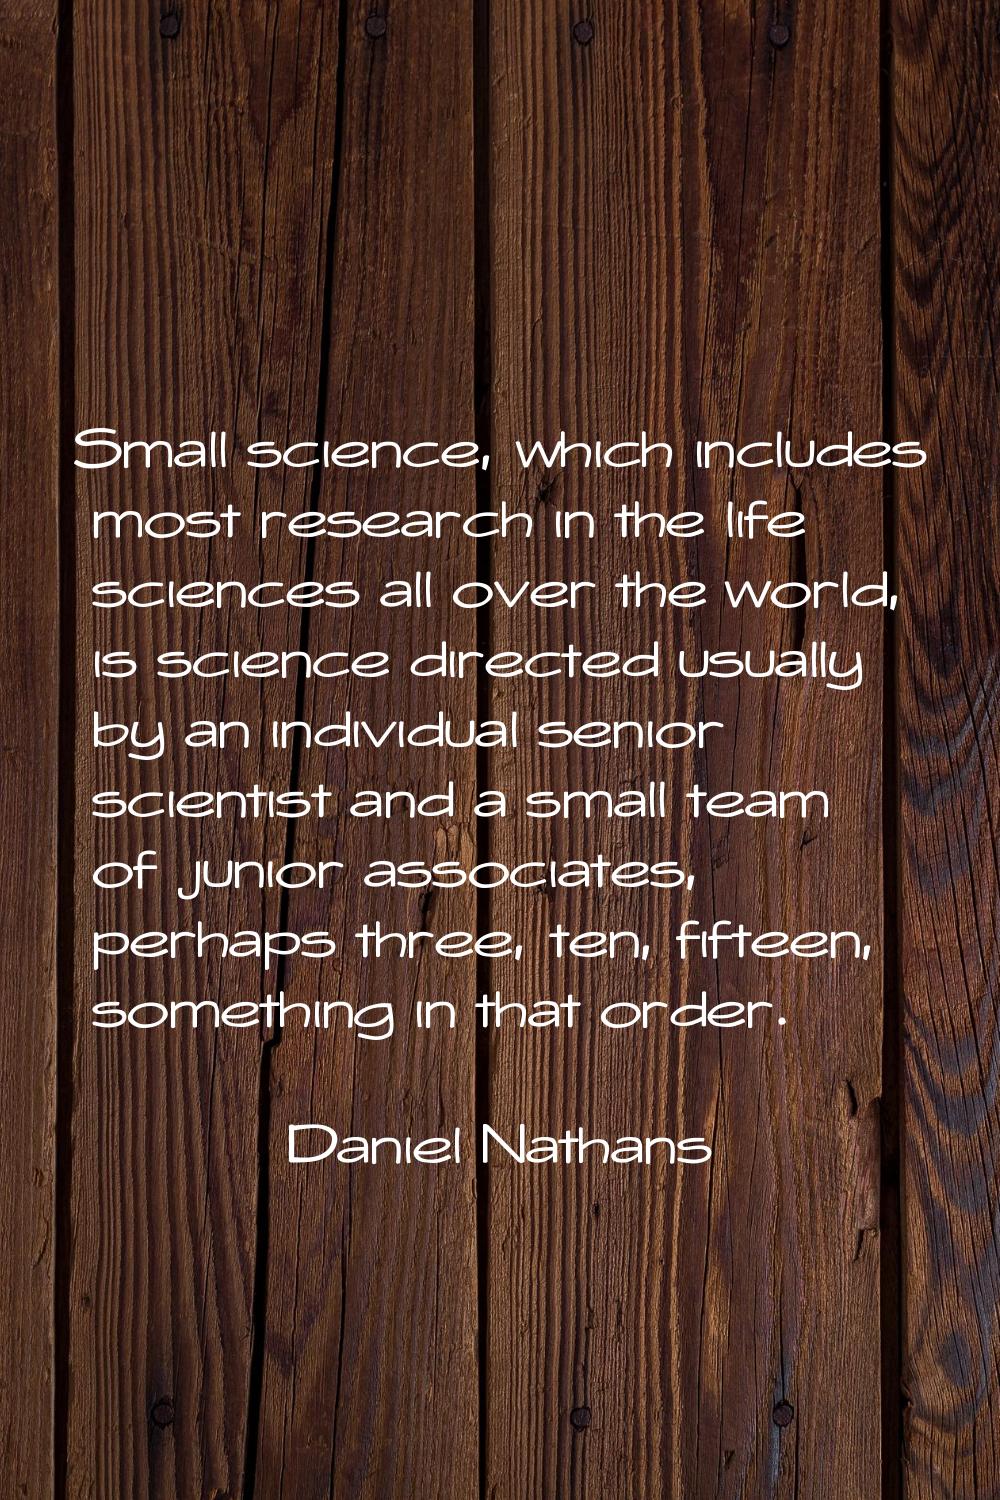 Small science, which includes most research in the life sciences all over the world, is science dir